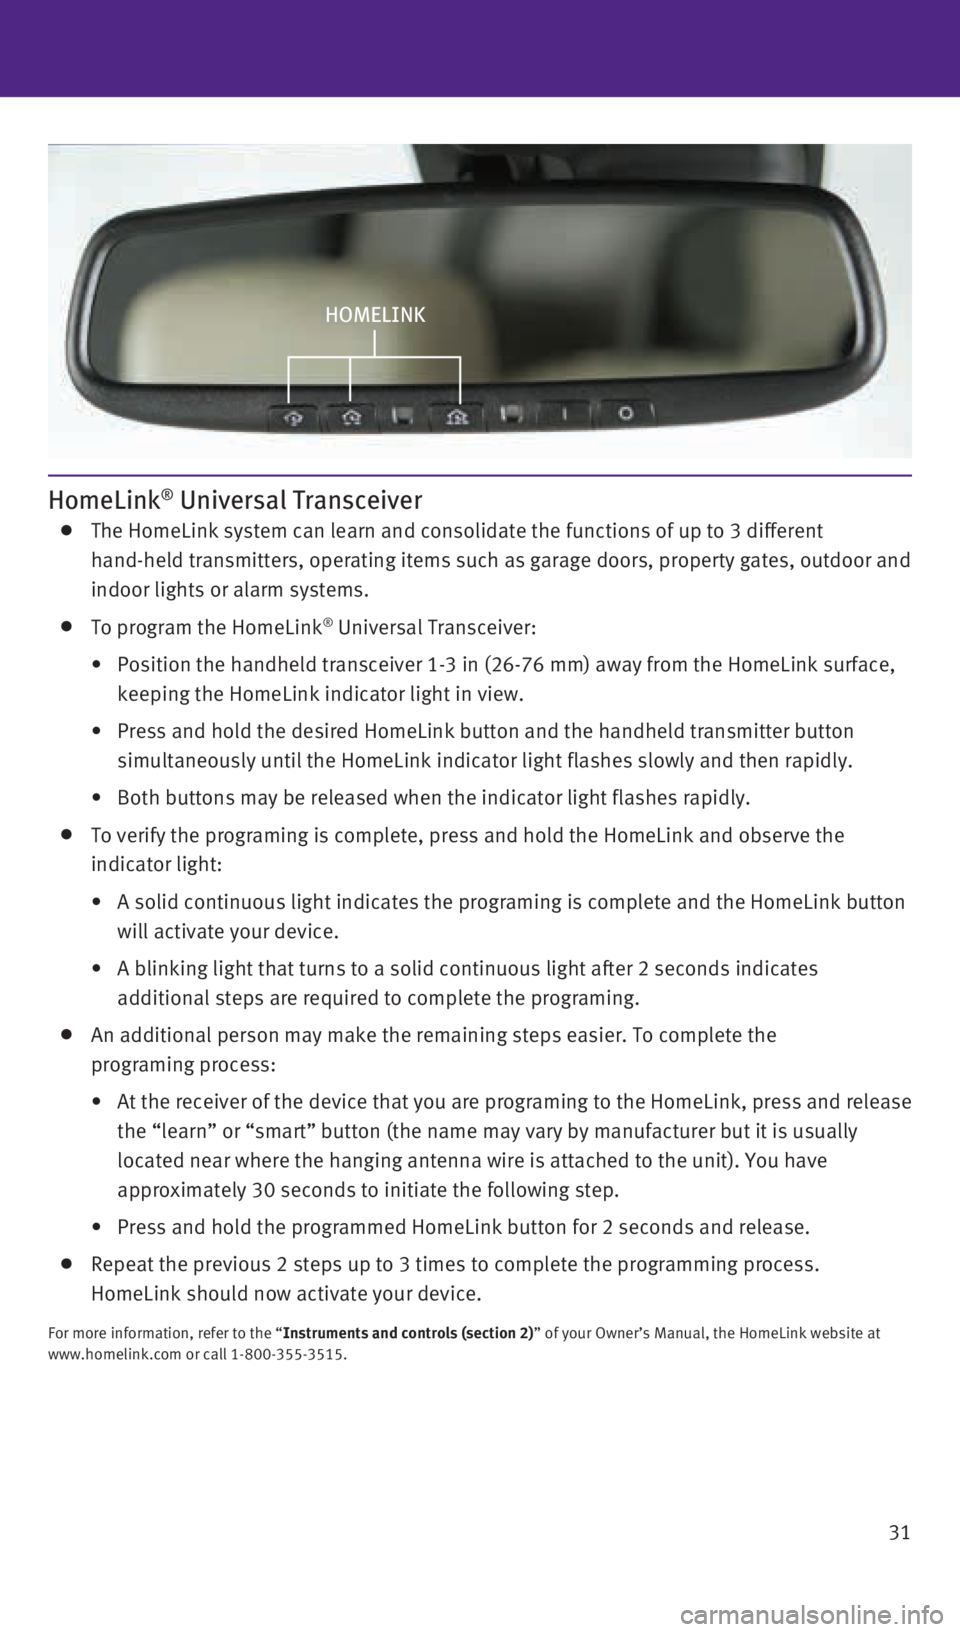 INFINITI QX60 HYBRID 2014  Quick Reference Guide 31
HomeLink® Universal Transceiver   The HomeLink system can learn and consolidate the functions of up to 3 d\
ifferent  
hand-held transmitters, operating items such as garage doors, property g\
ate